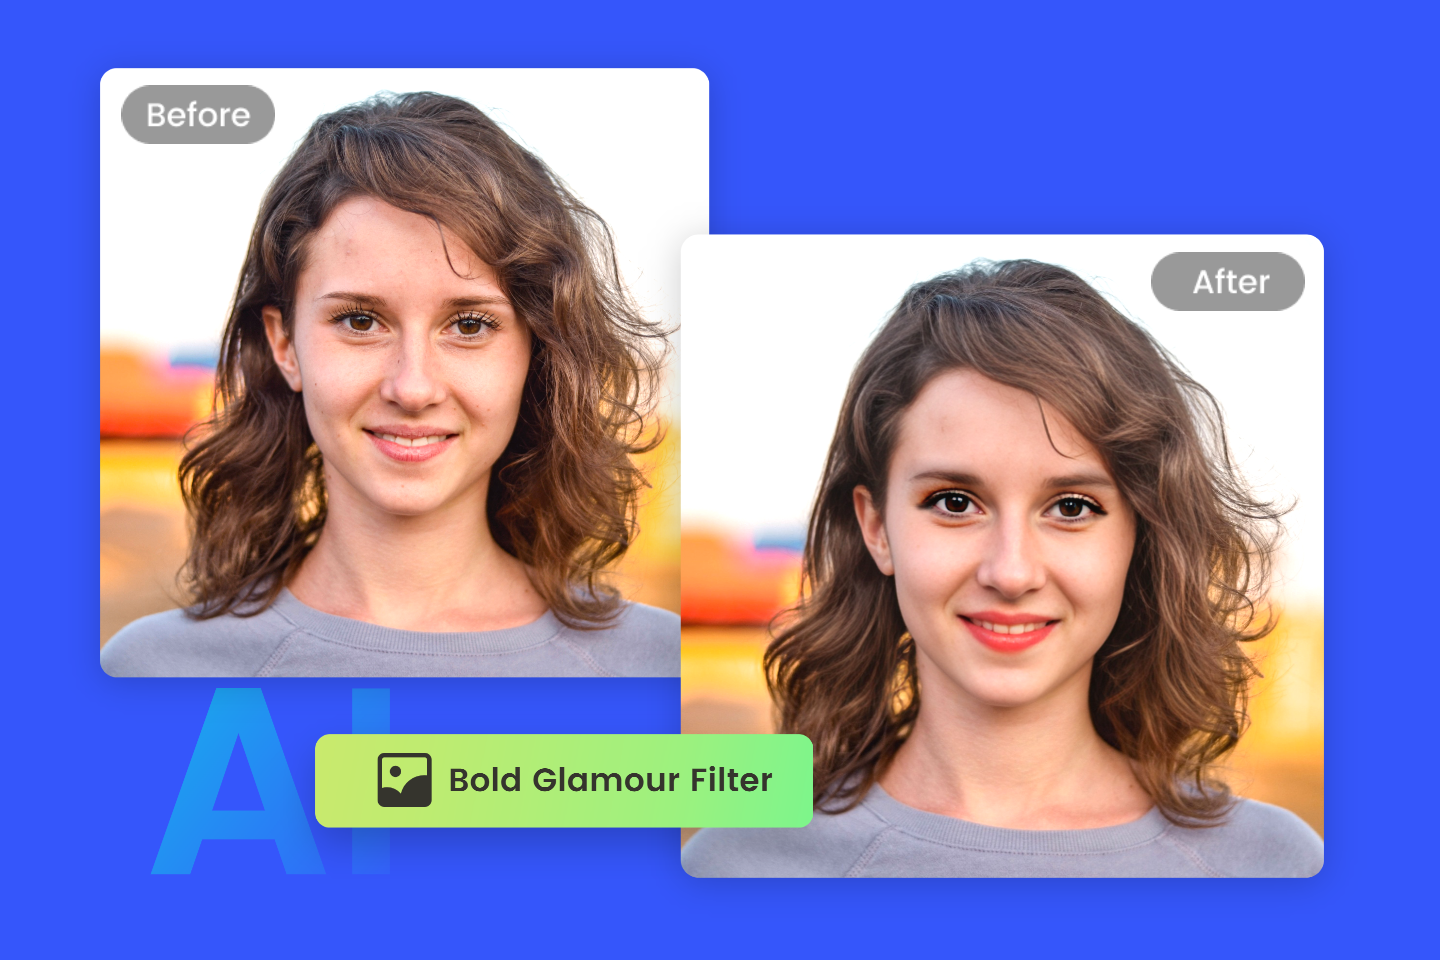 Apply fotor bold glamour filter to a young girl